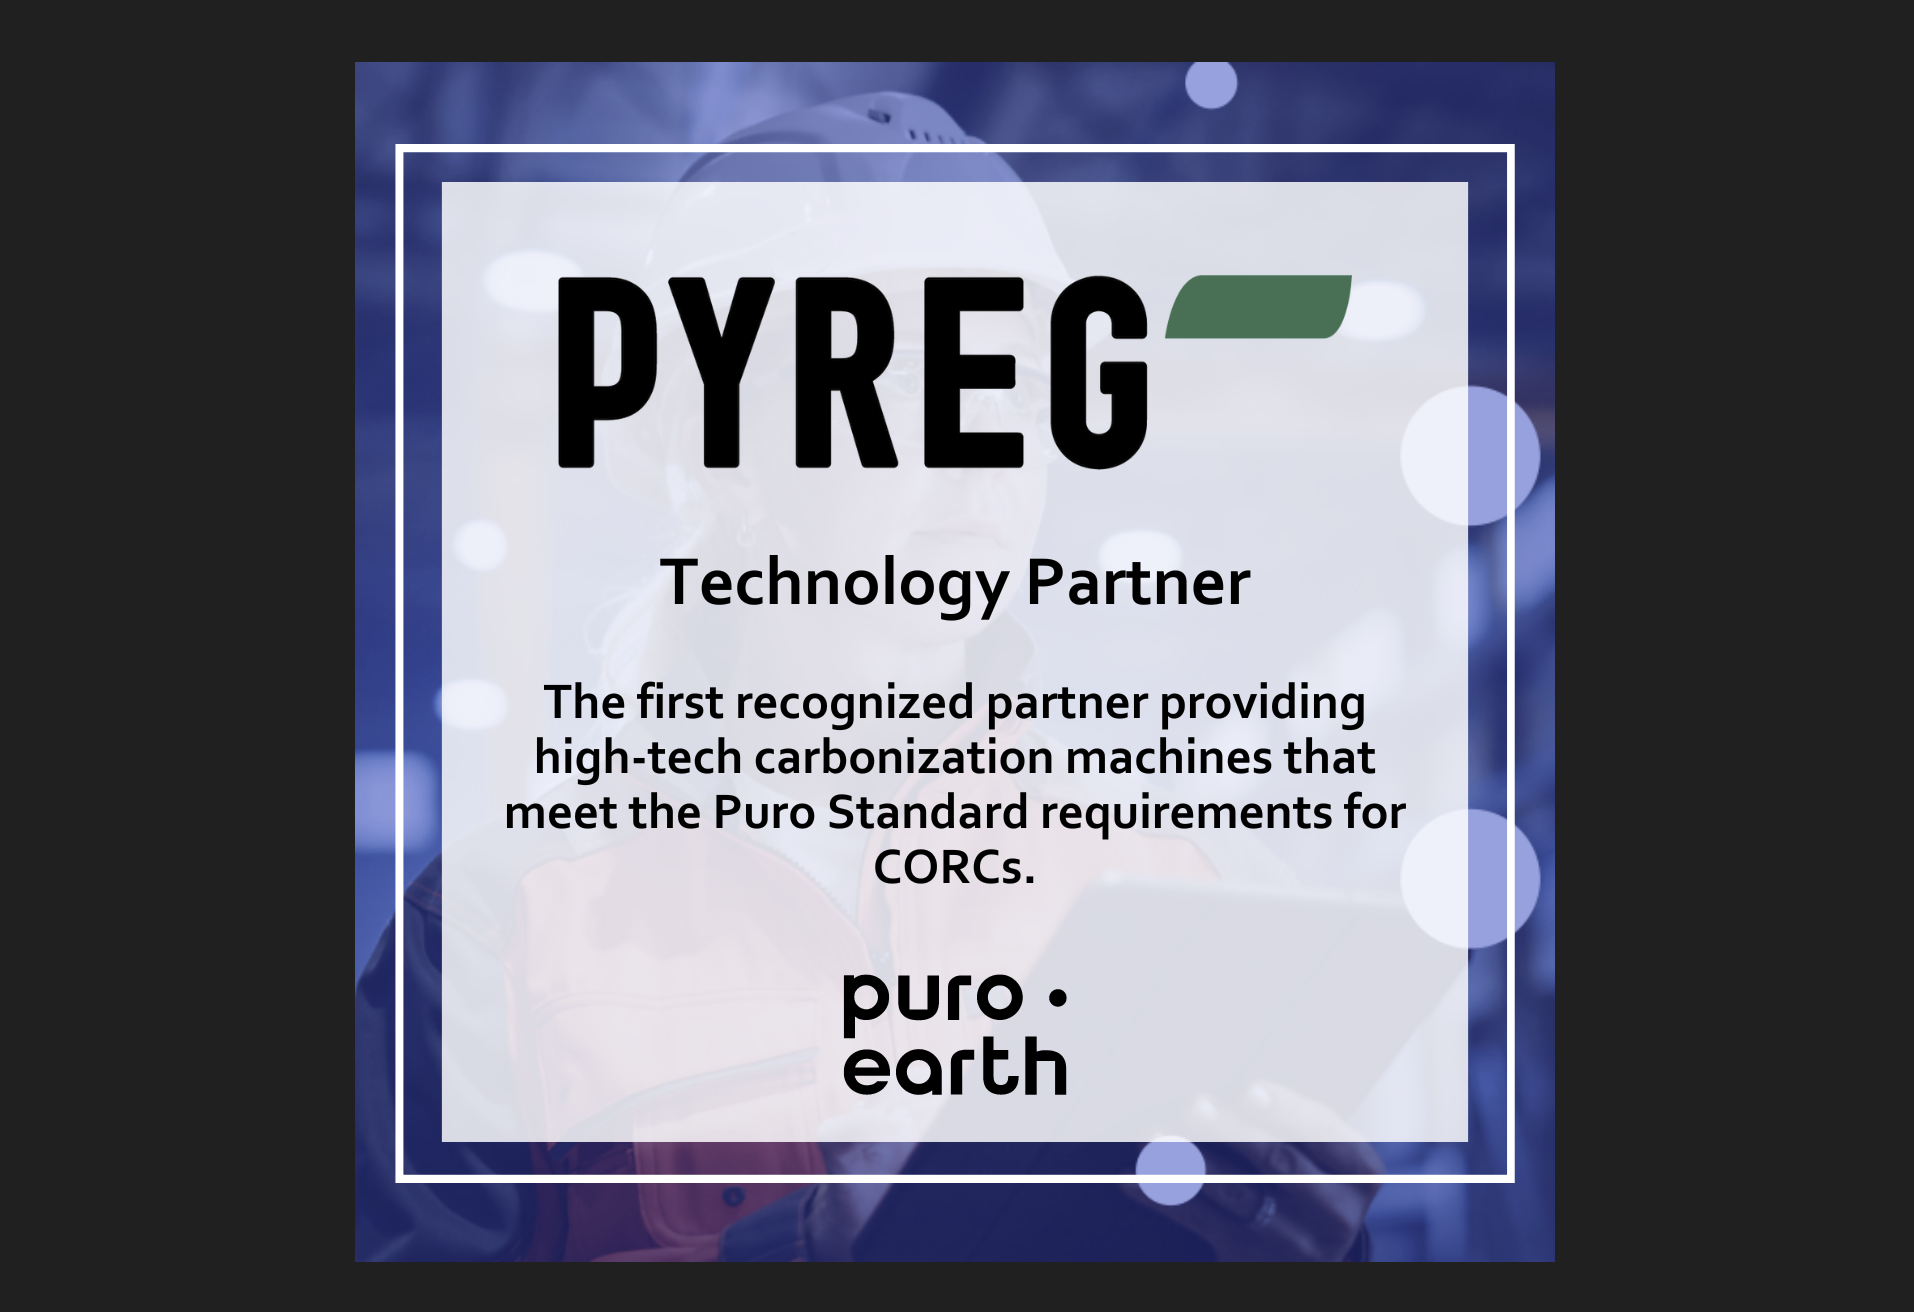 PYREG is the first recognized technology of puro.earth